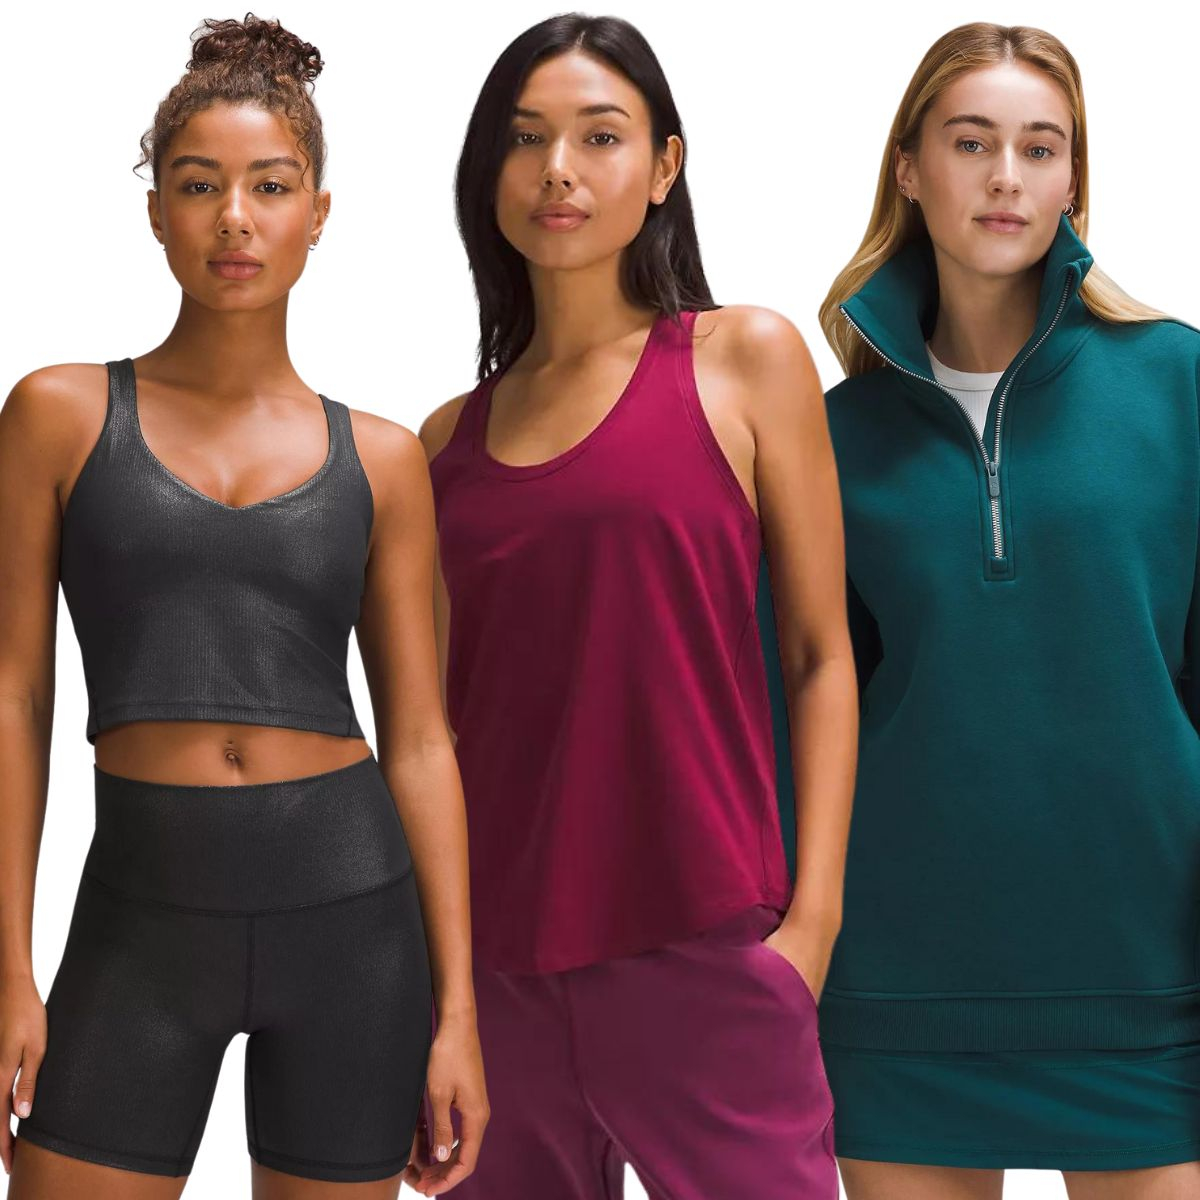 Lululemon Added These Jewel Tones to We Made Too Much, Starting at $24